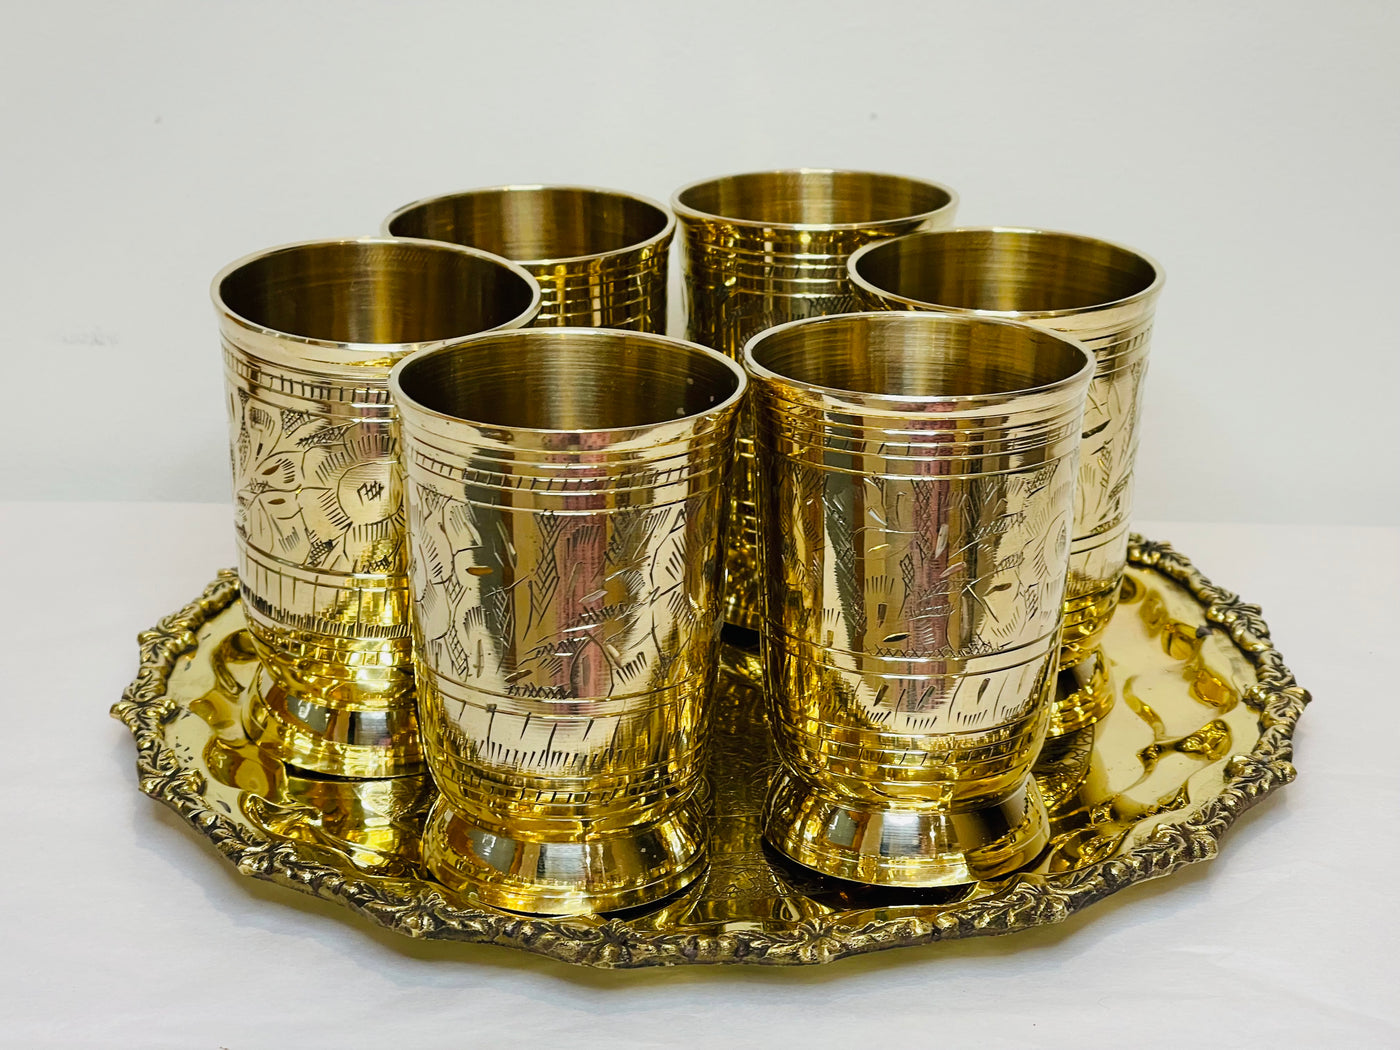 Bronze Tray set comes with 1 tray and, 6 Glasses